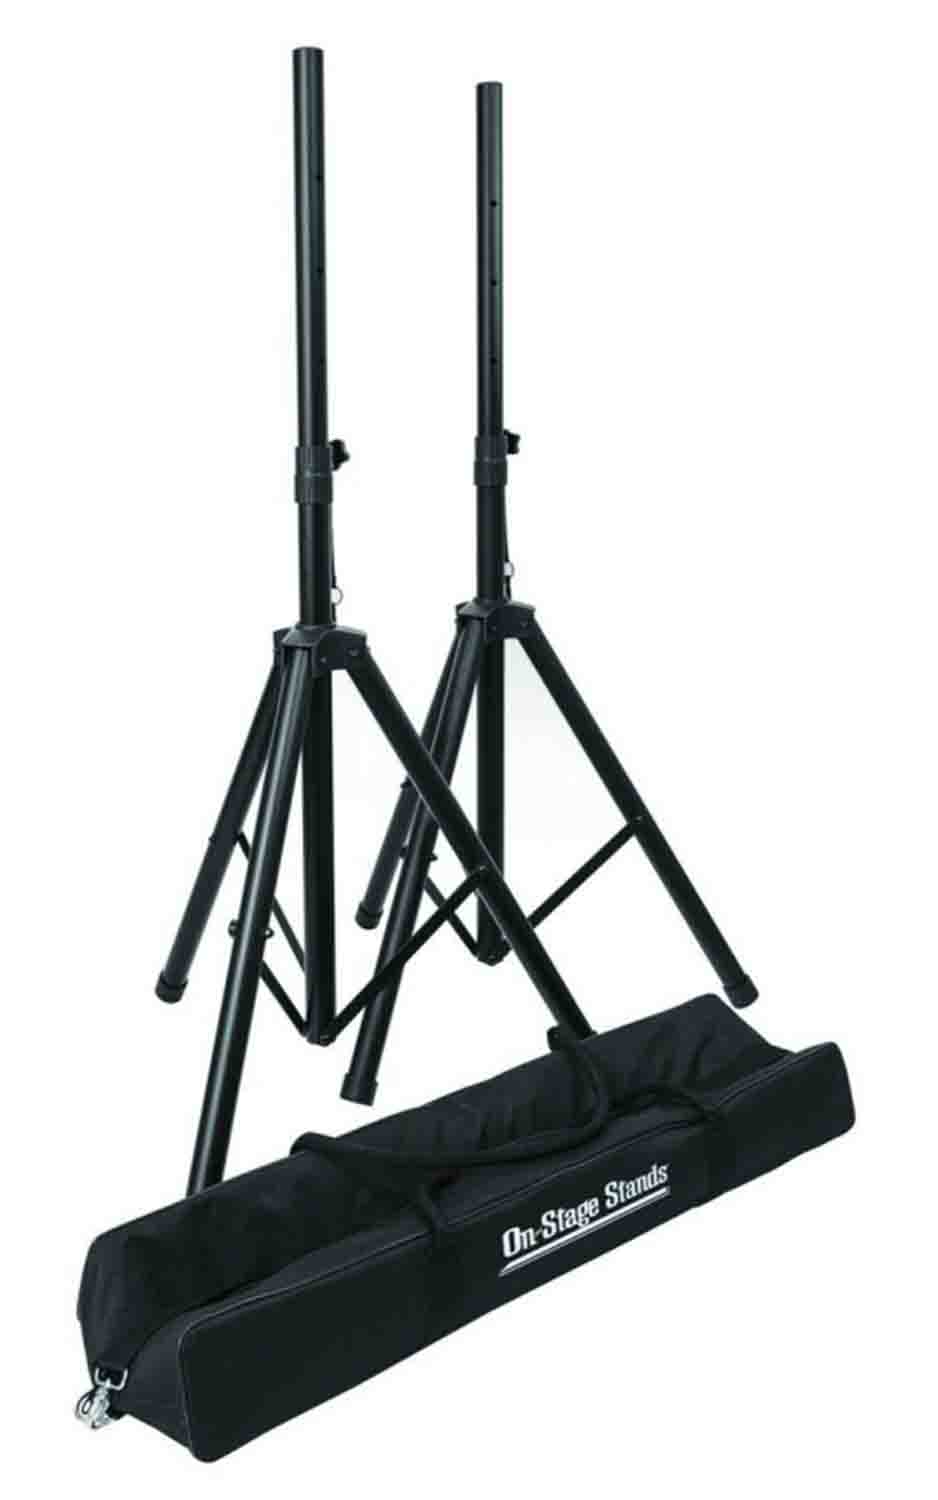 OnStage SSP7750 Compact Speaker Stand Pack with Bag and Two Stands - Black - Hollywood DJ